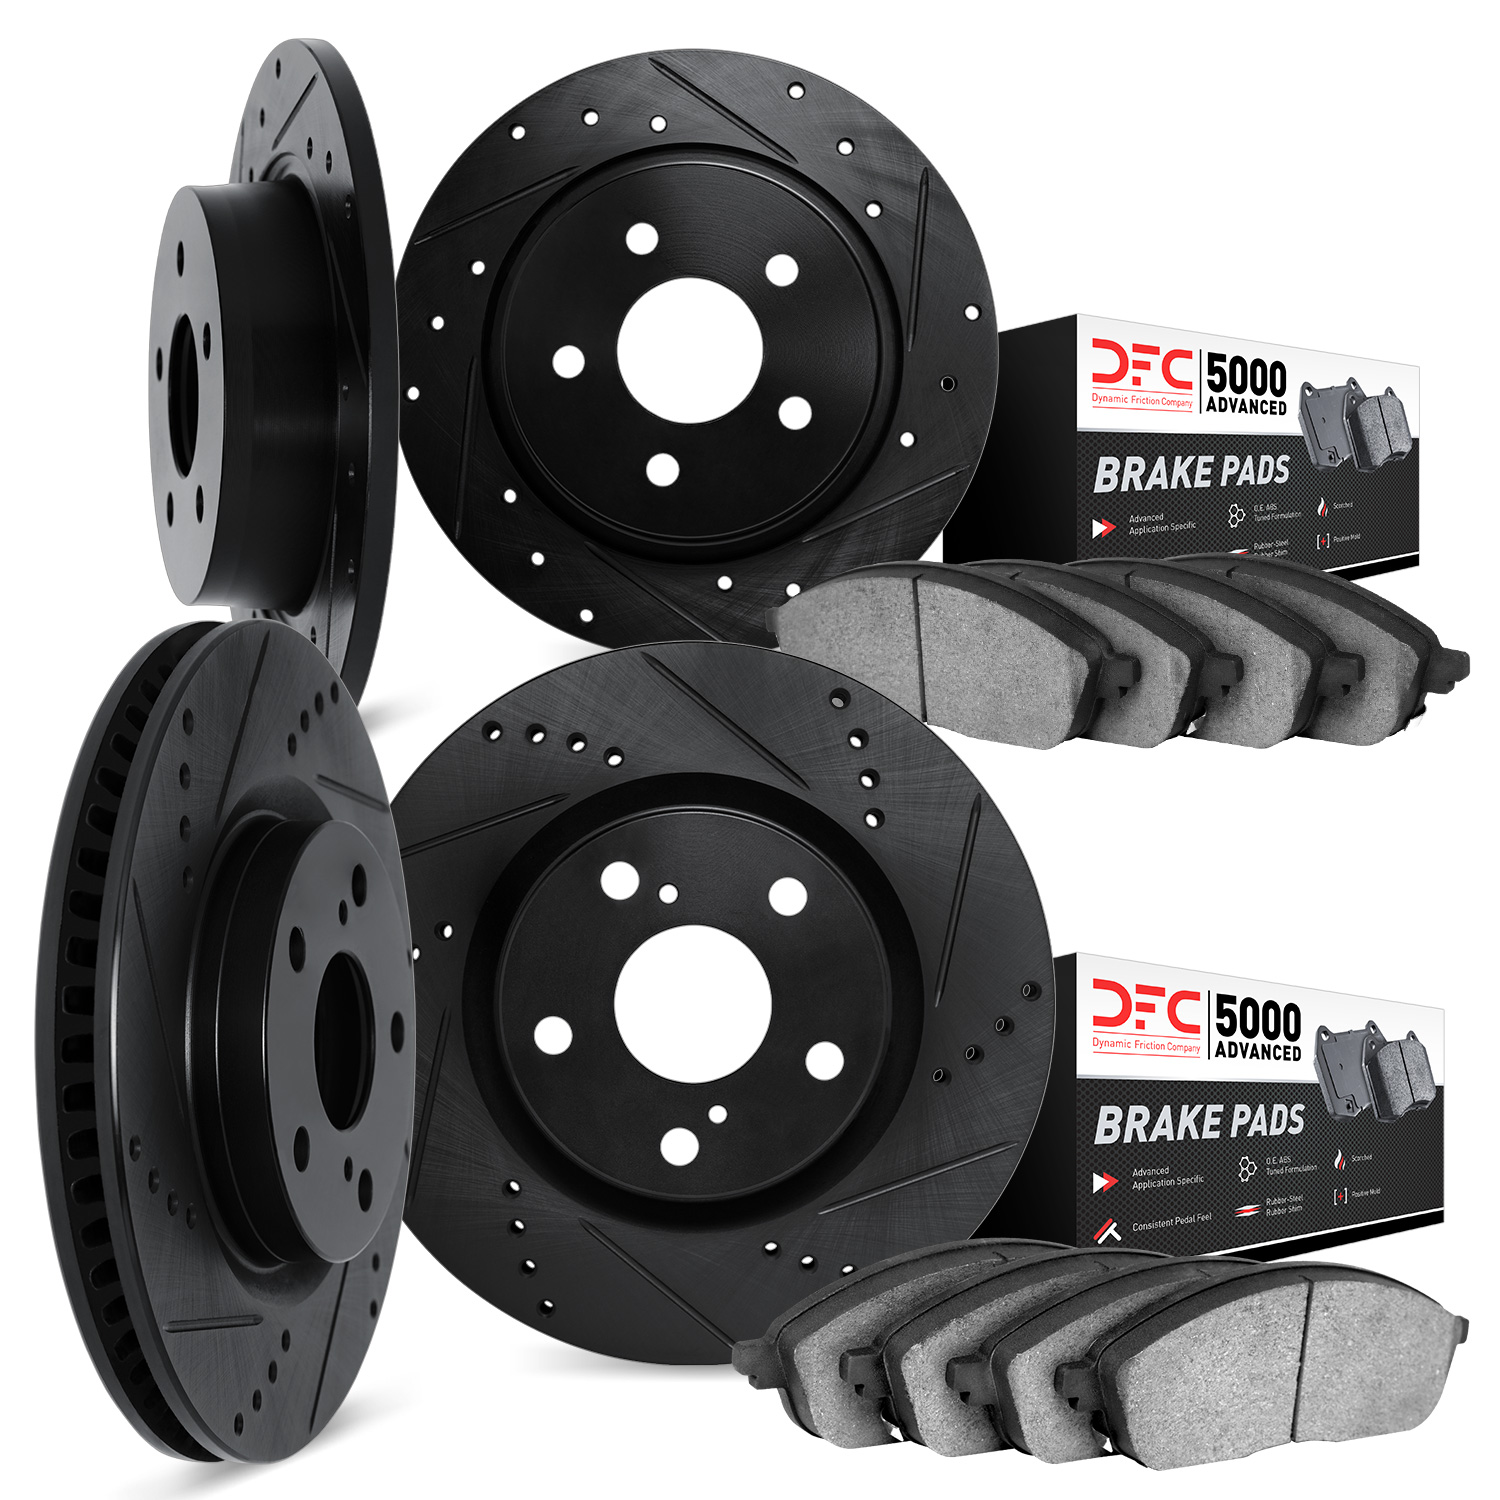 8504-52005 Drilled/Slotted Brake Rotors w/5000 Advanced Brake Pads Kit [Black], 2005-2005 GM, Position: Front and Rear